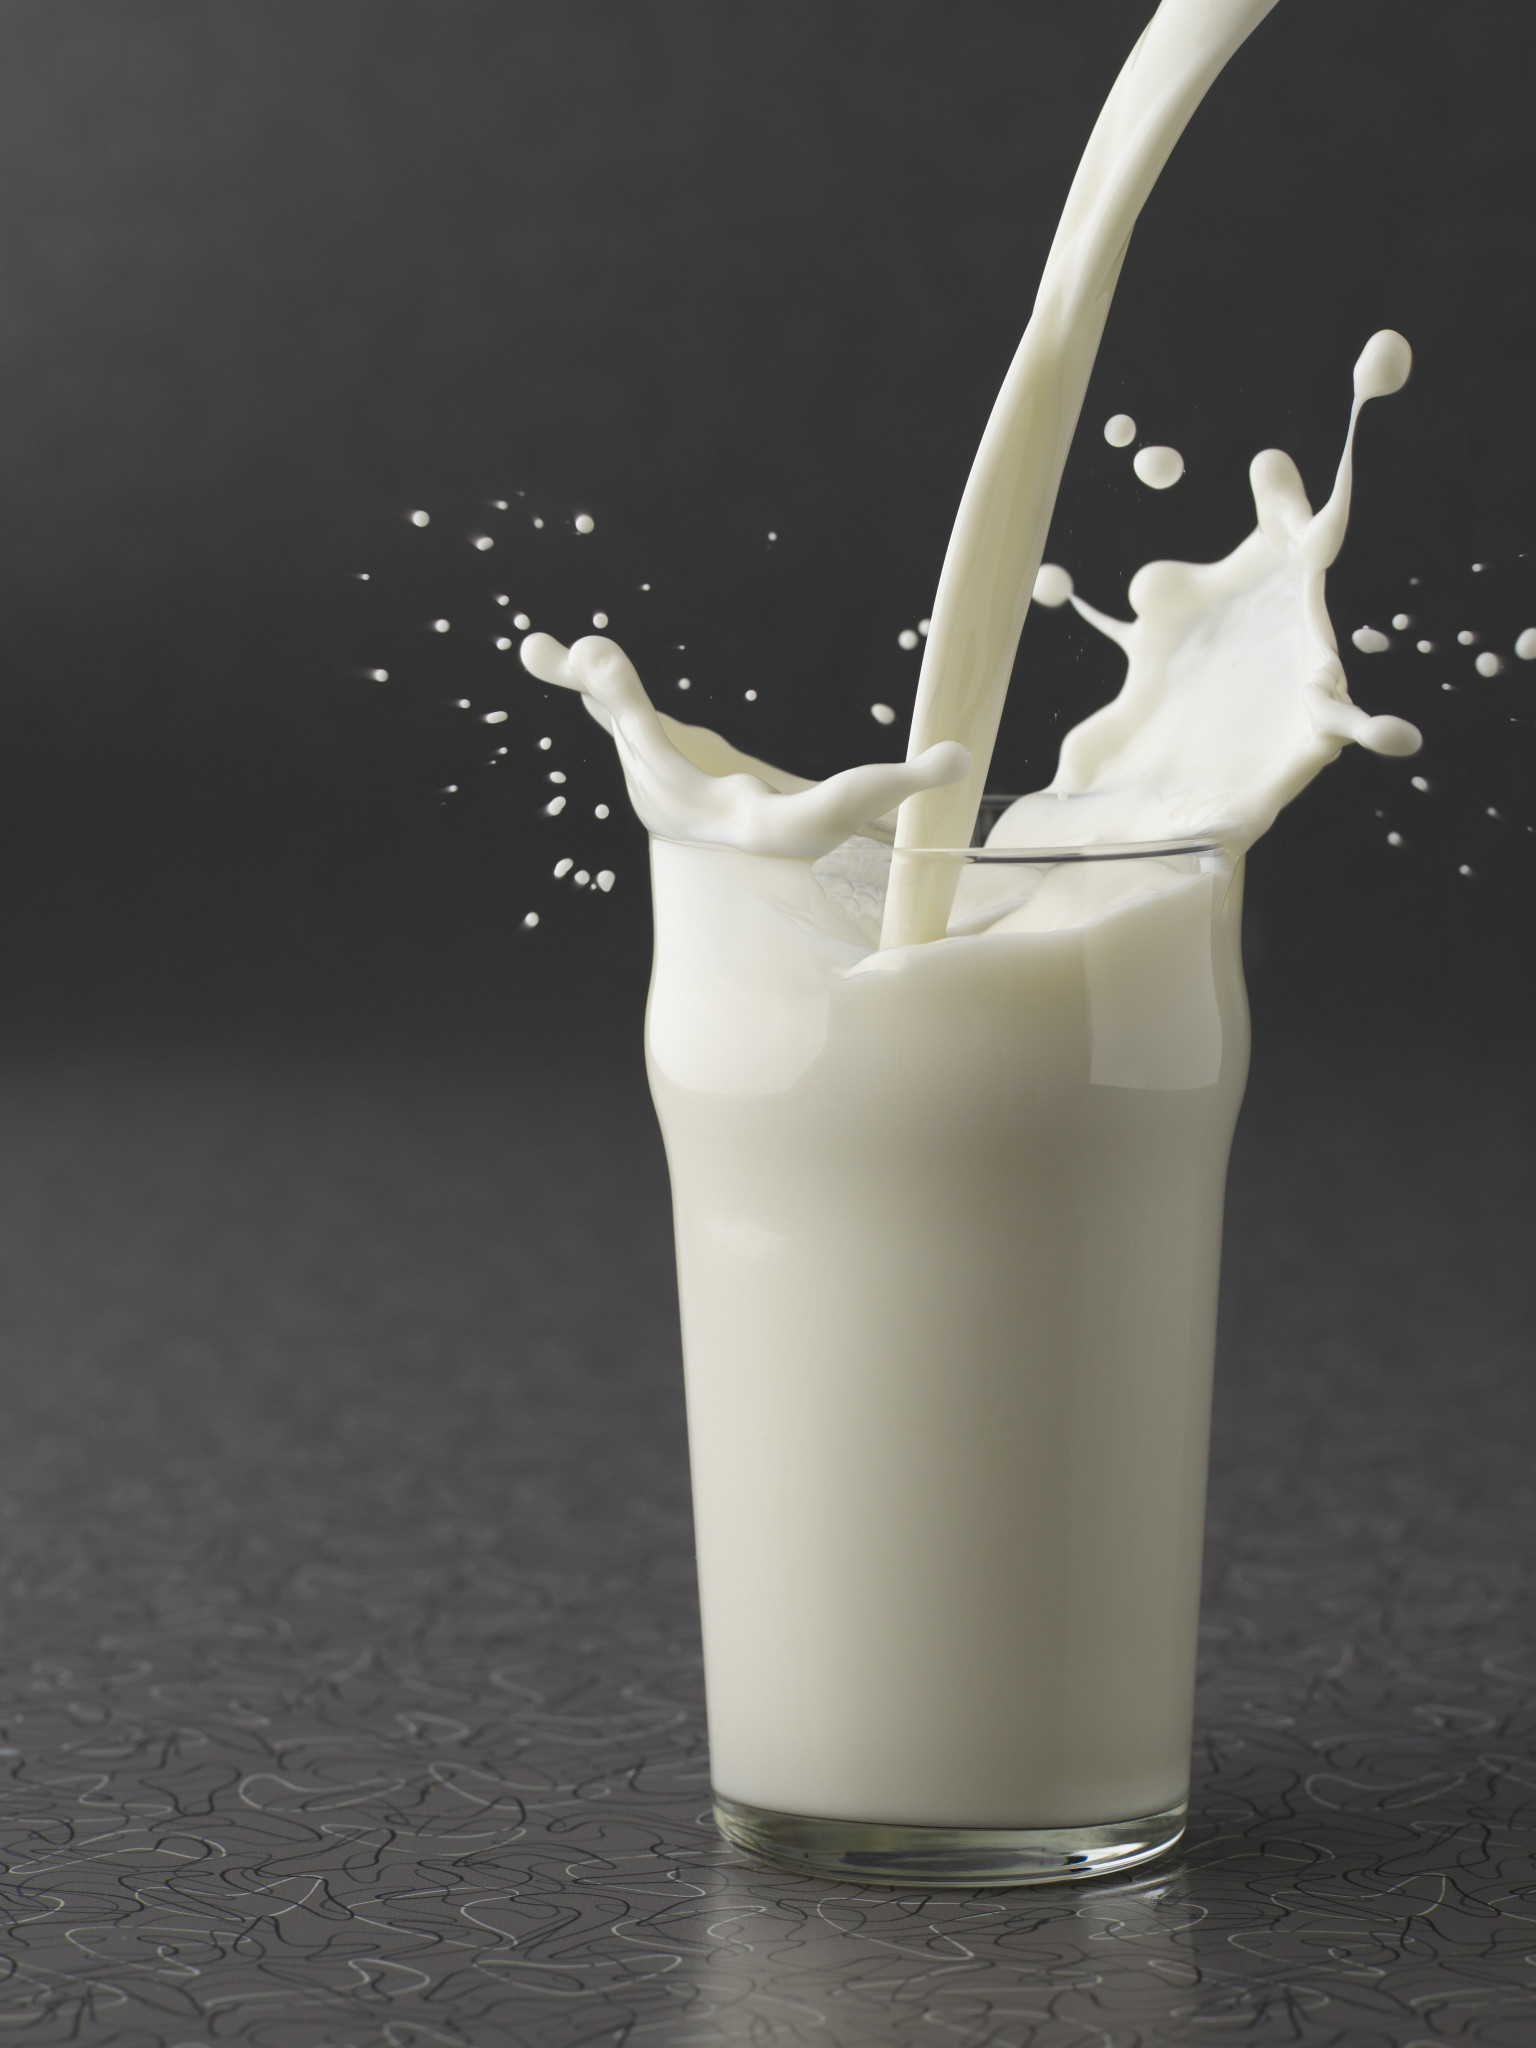 Milk Does A Body Good? Maybe Not Always, Harvard Doc Argues | HuffPost